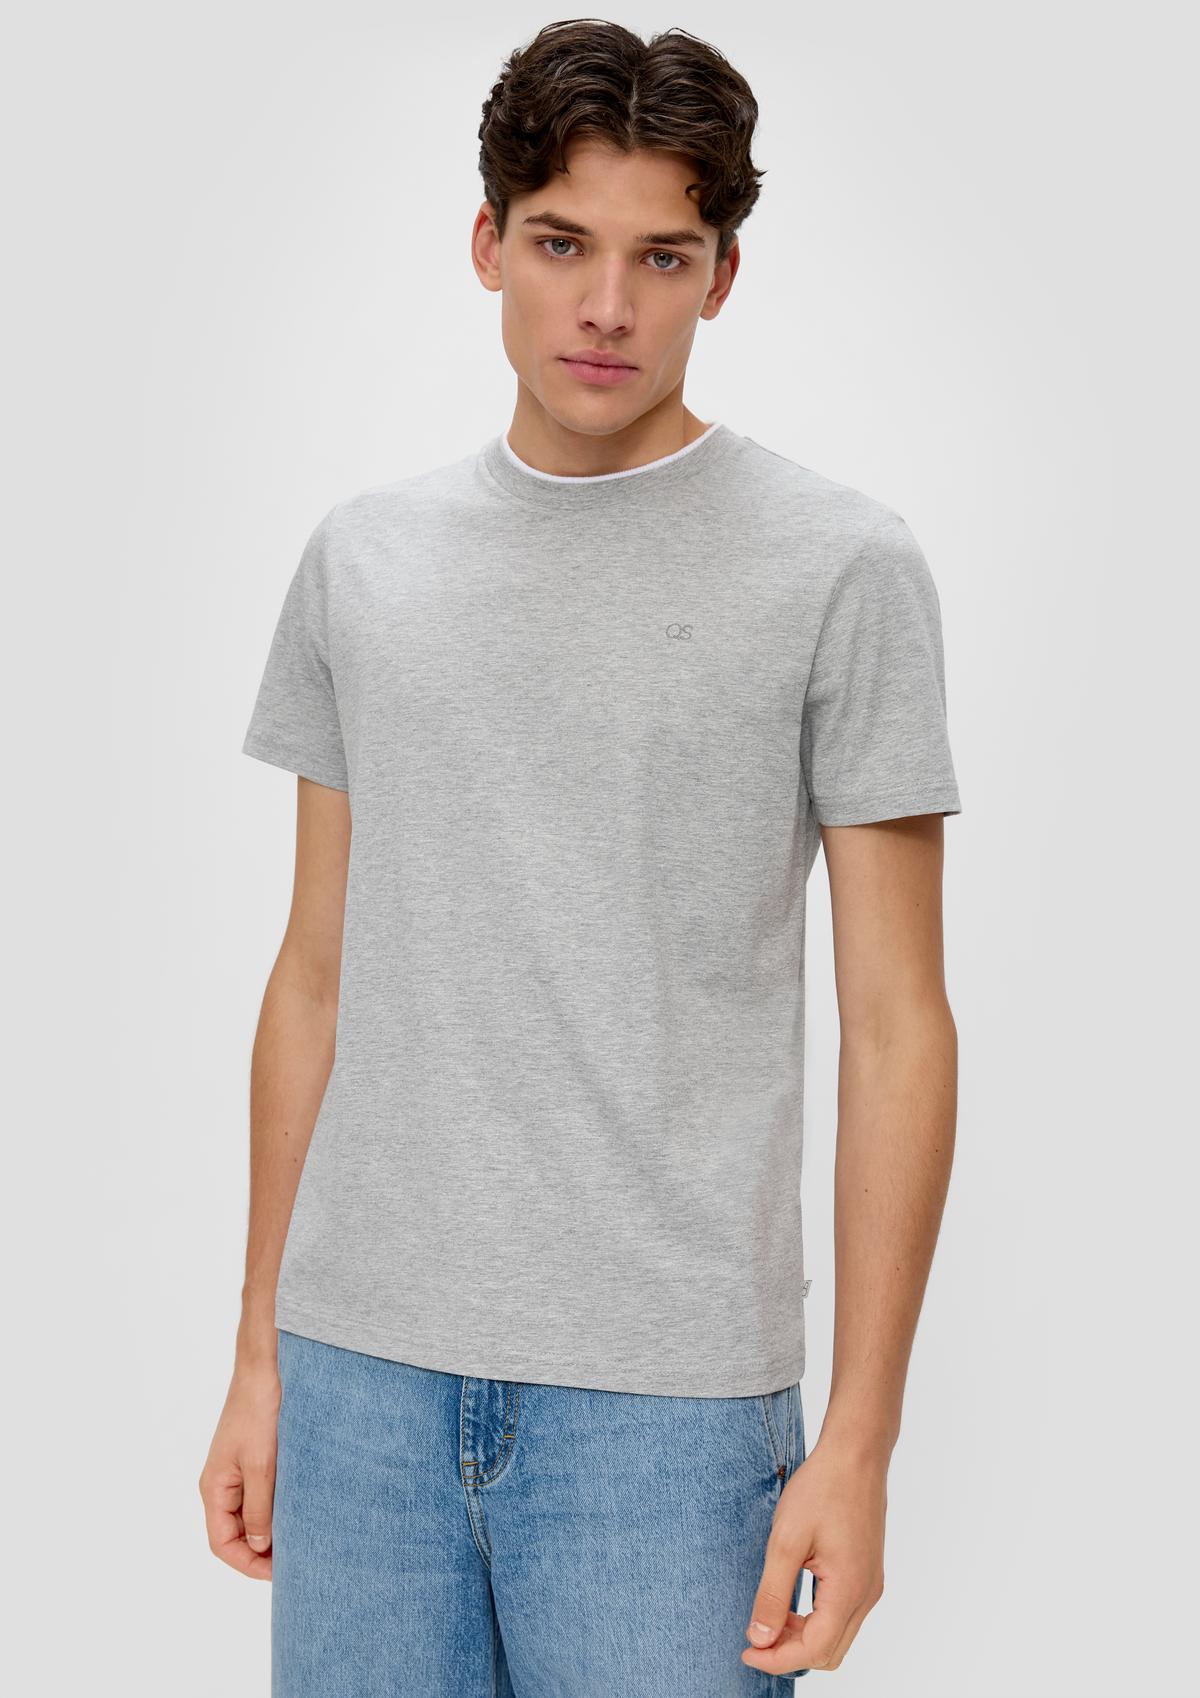 T-shirt with a layered crew neck